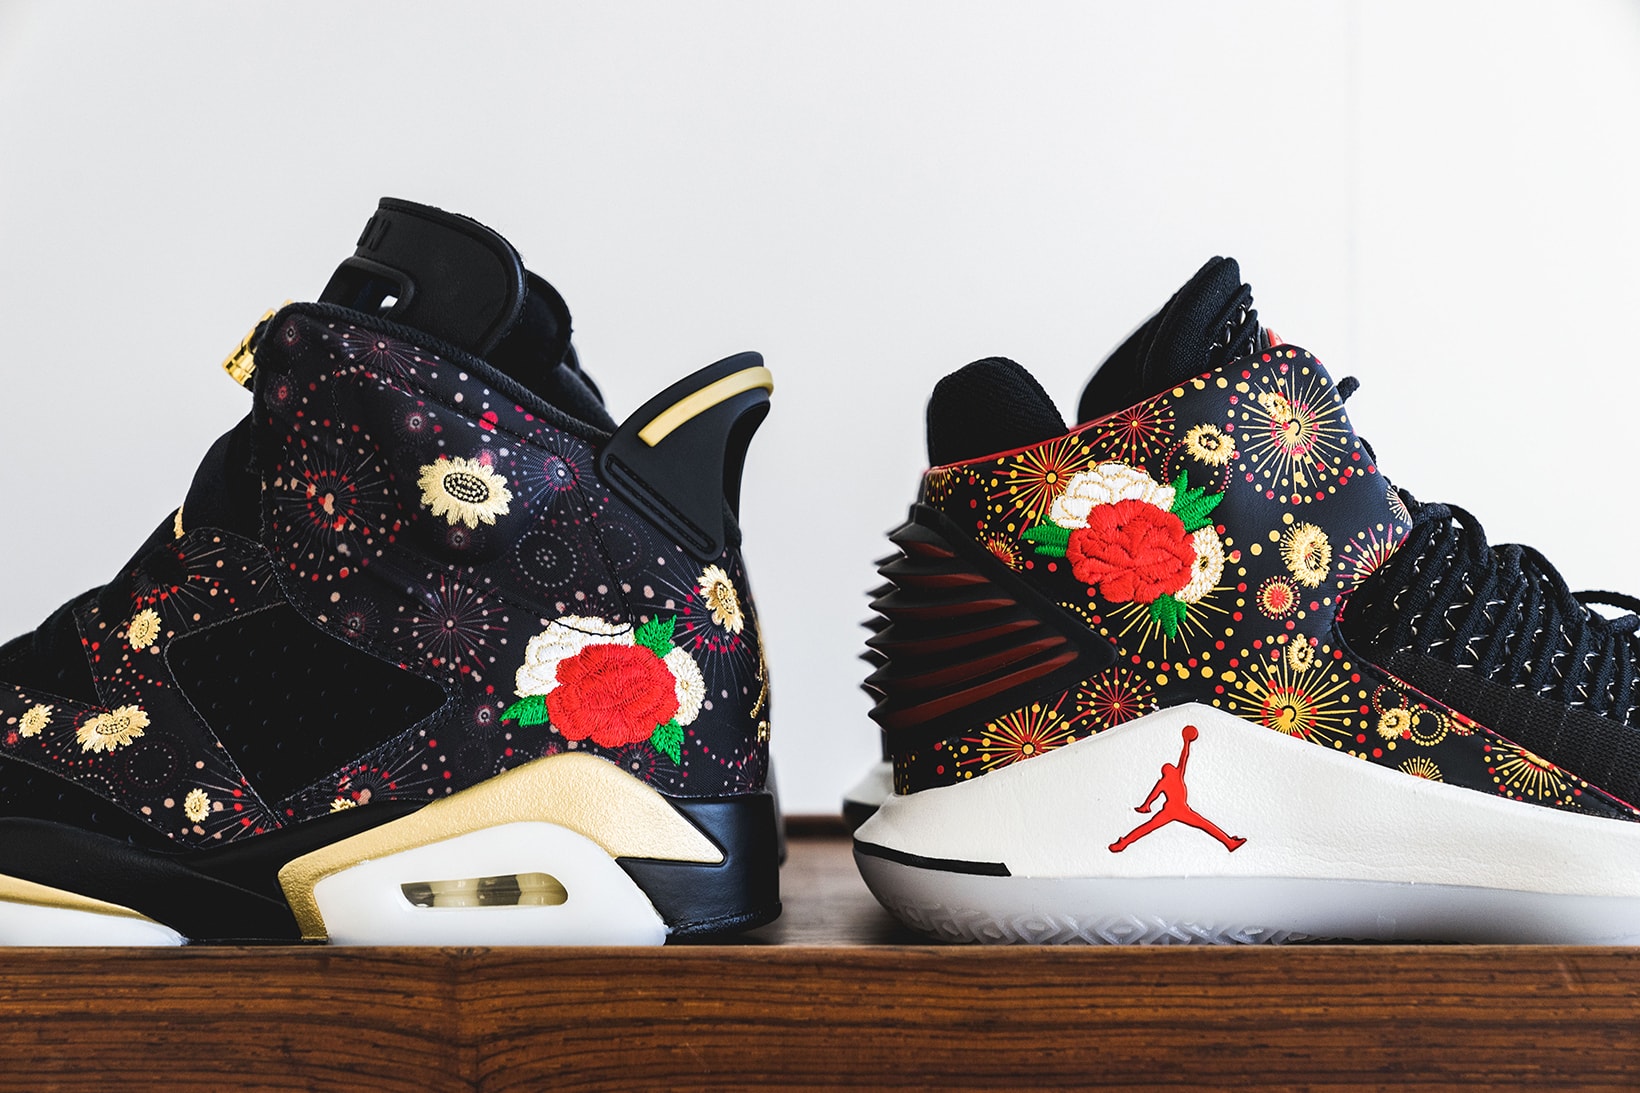 Air Jordan 6 32 low Chinese New Year cny black gold red fireworks flower floral embroidery january february release date footwear 2018